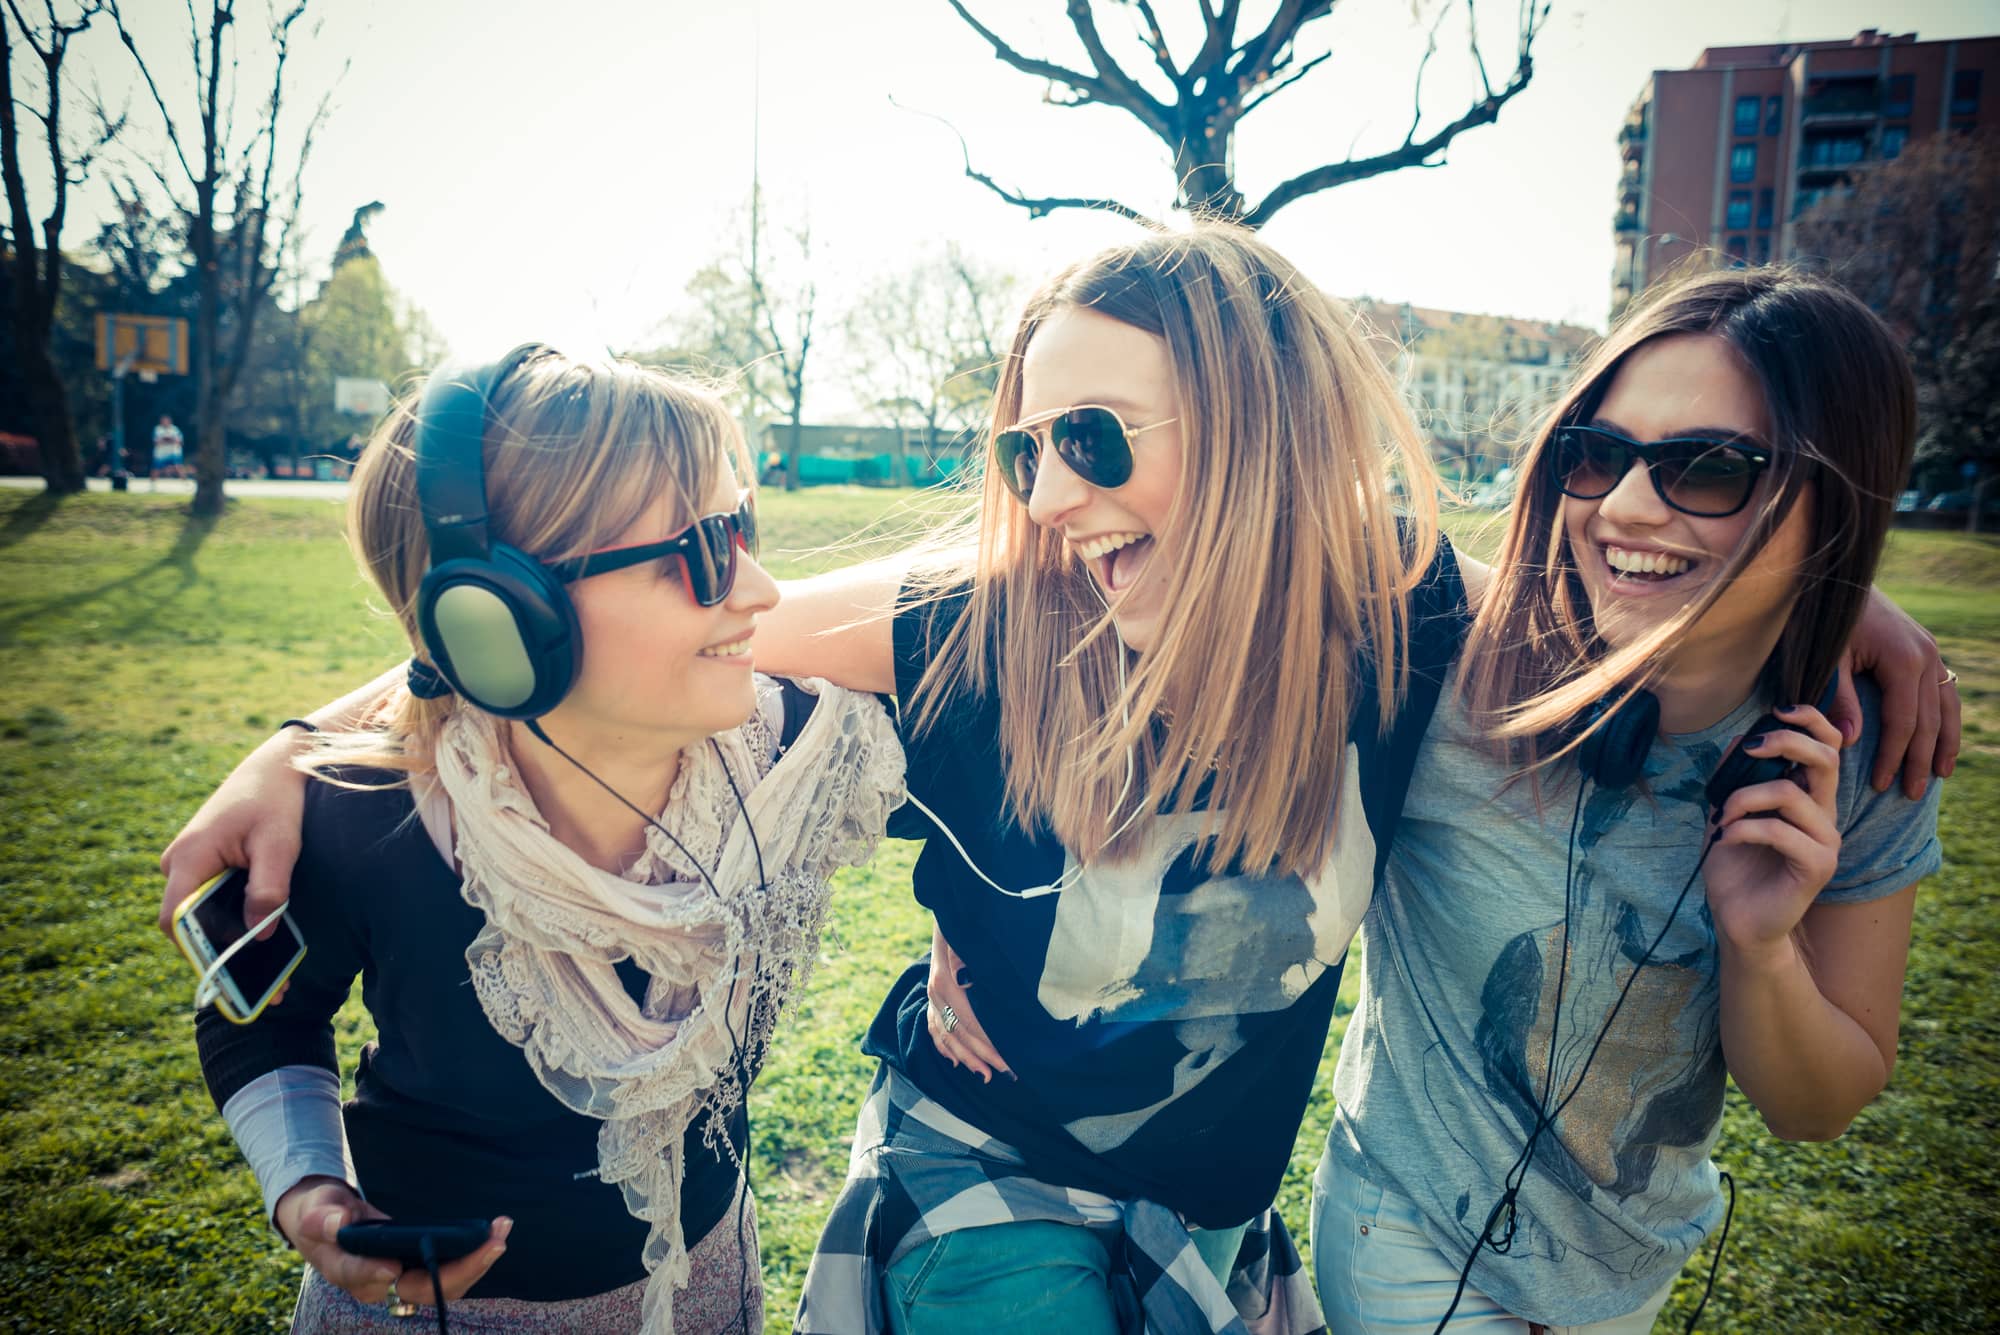 three beautiful friends authentic in urban contest listening to music